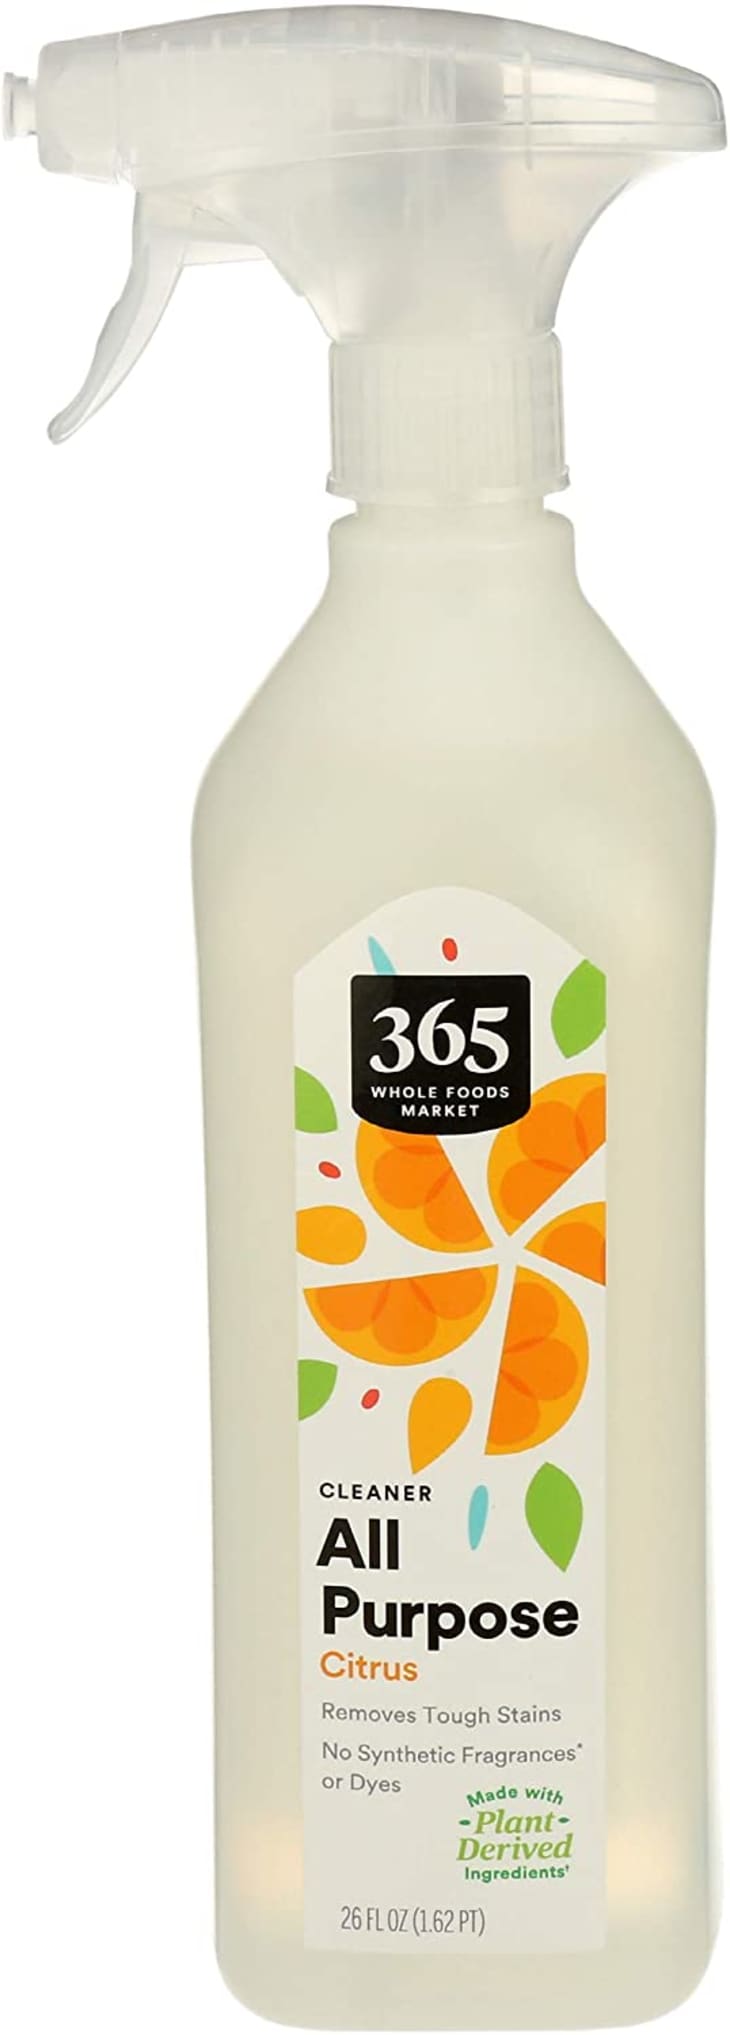 365 by Whole Foods Market, Cleaner All Purpose Citrus at Amazon